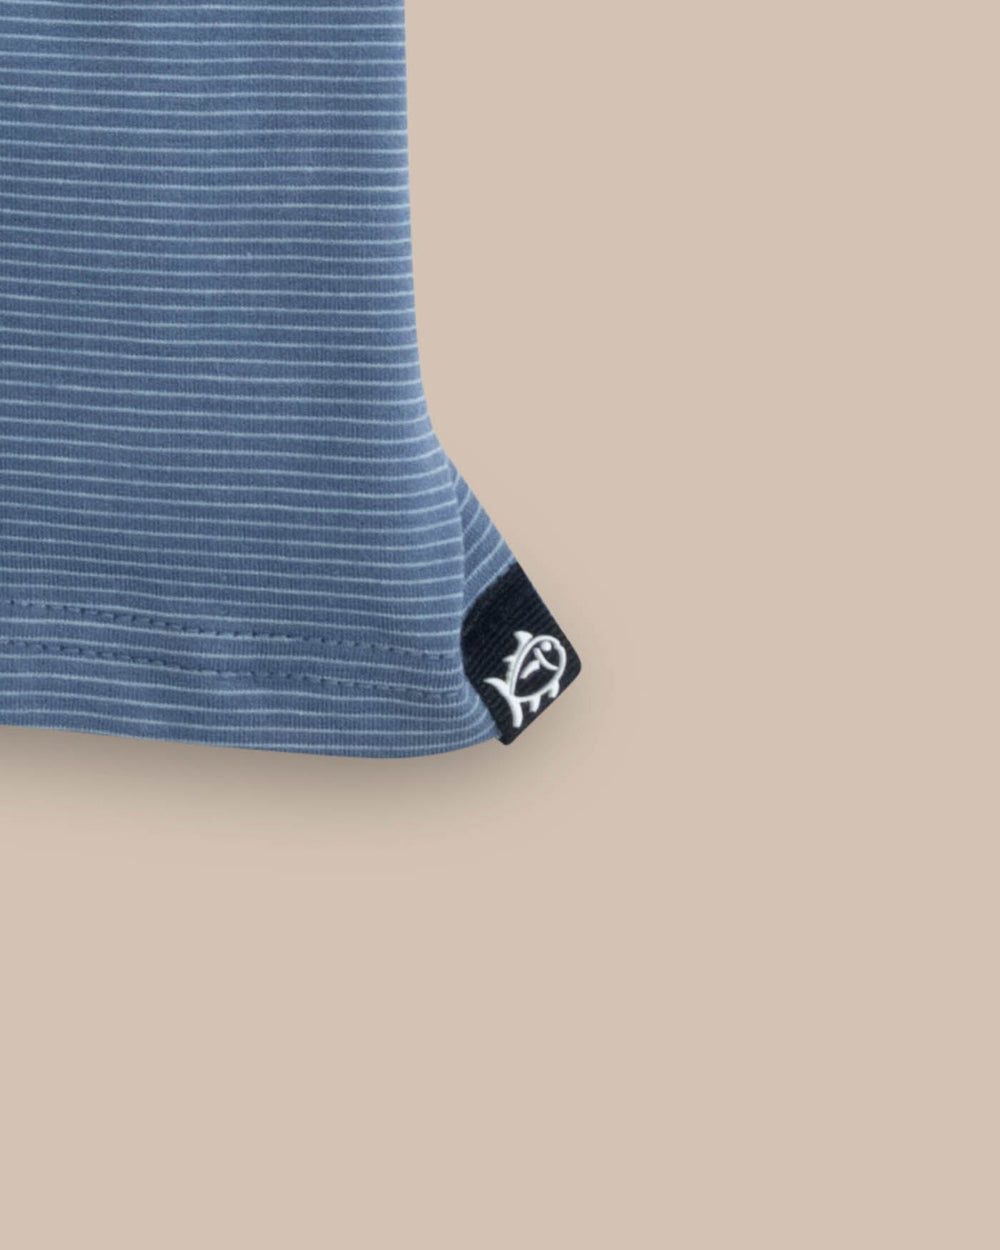 The detail view of the Southern Tide The Seaport Davenport Stripe Tee by Southern Tide - Coronet Blue